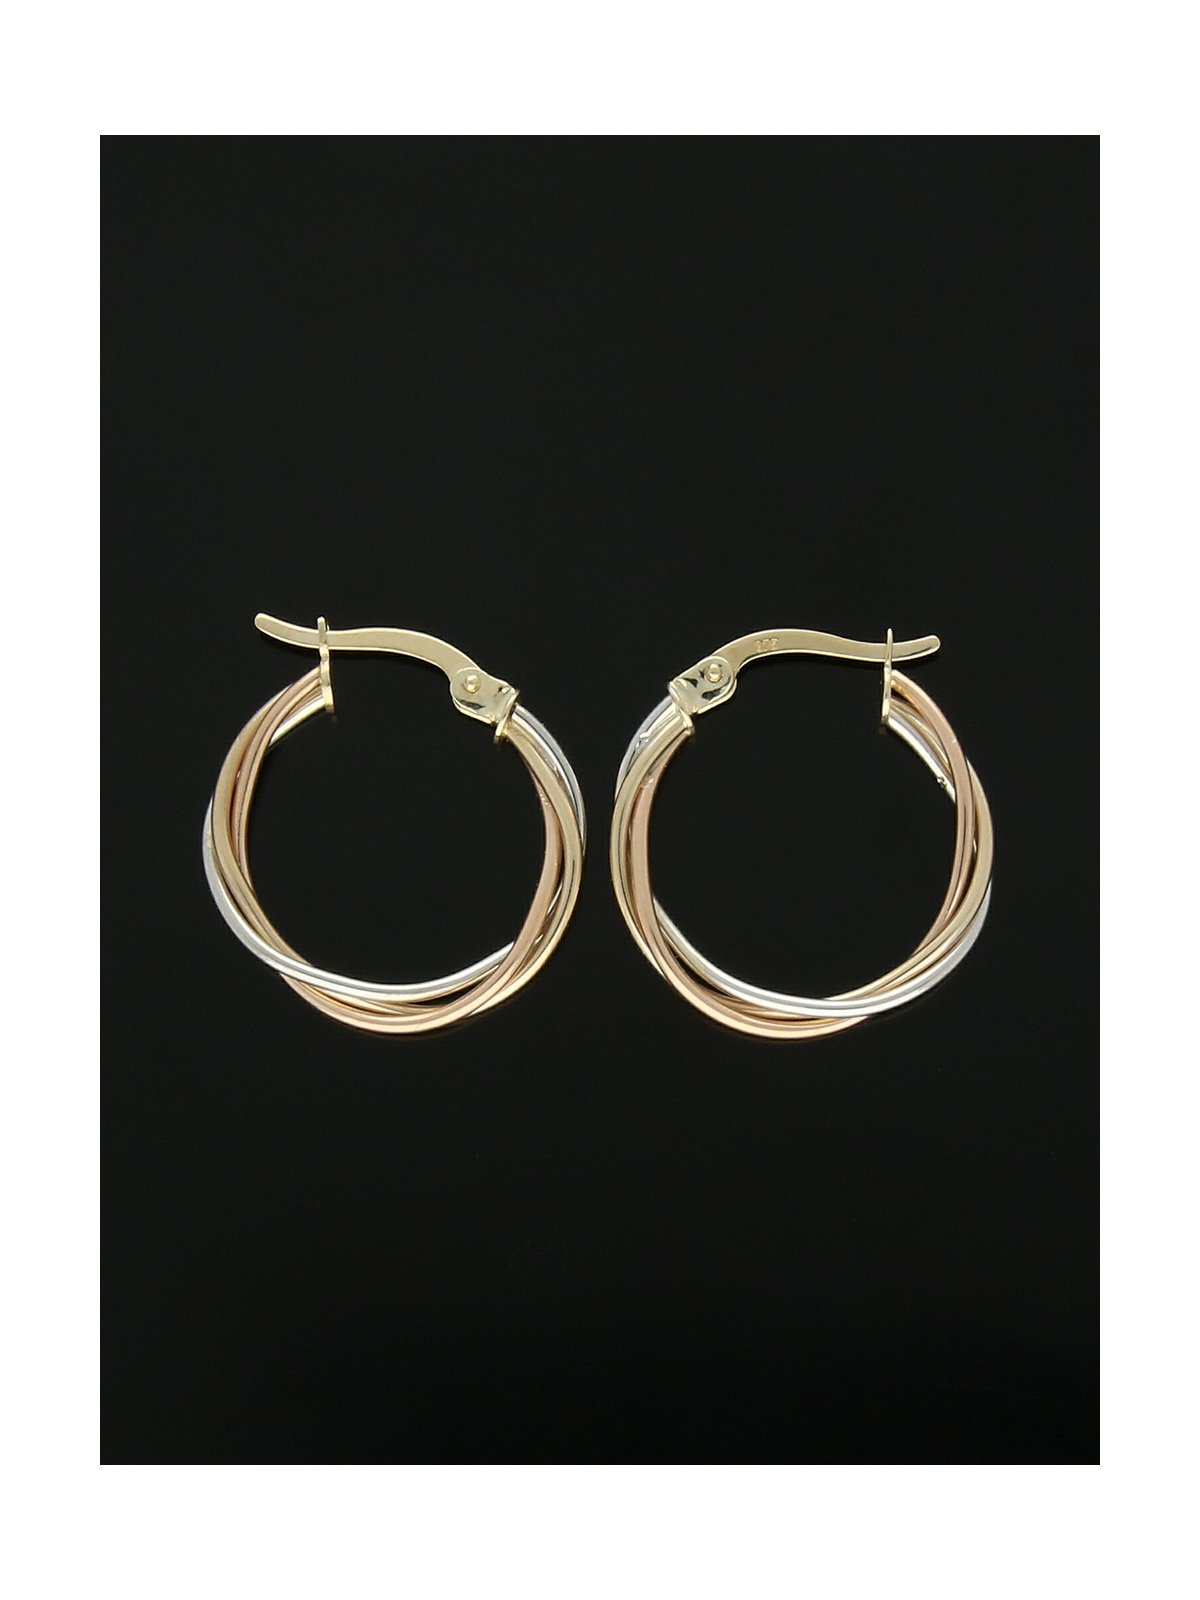 Twist Hoop Earrings 20mm in 9ct Yellow, White and Rose Gold